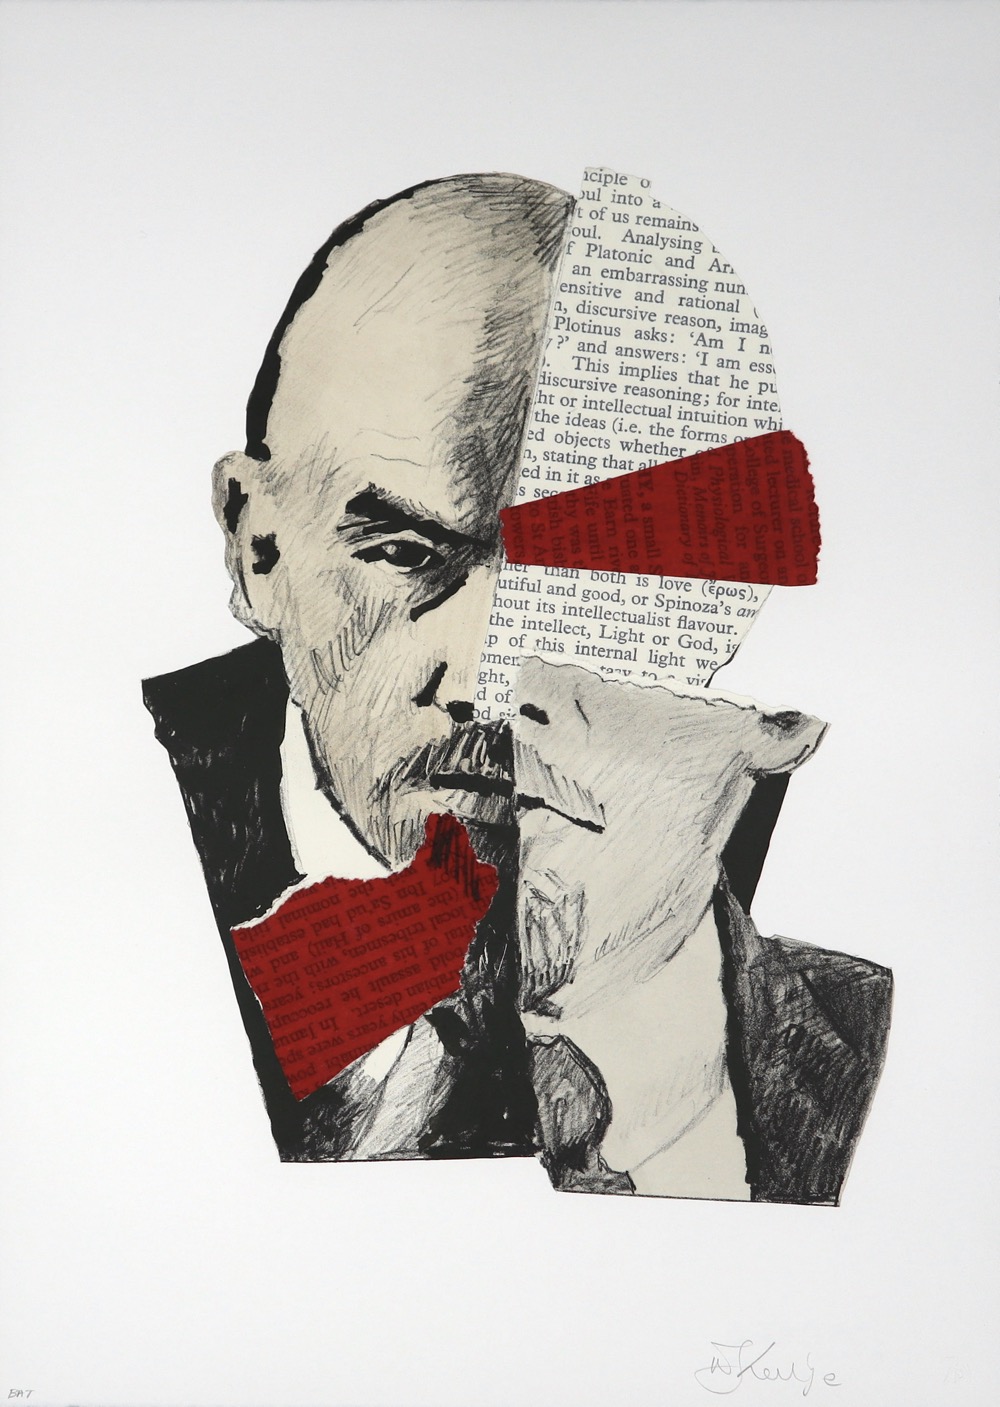 Head and shoulders portrait of Lenin consisting of hand-printed and collaged elements adhered to white paper by William Kentridge